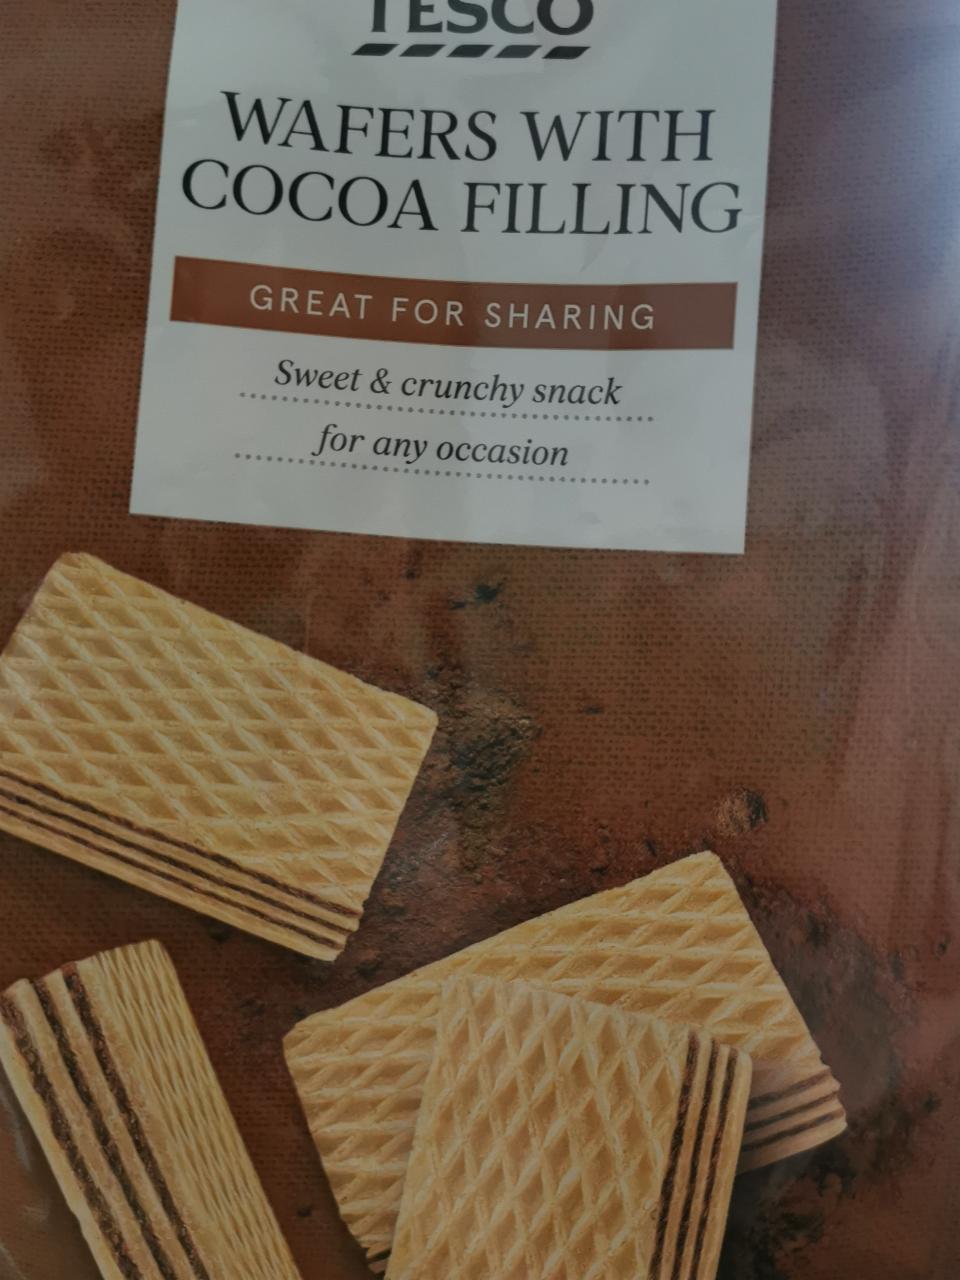 Fotografie - Wafers with cocoa filling Tesco